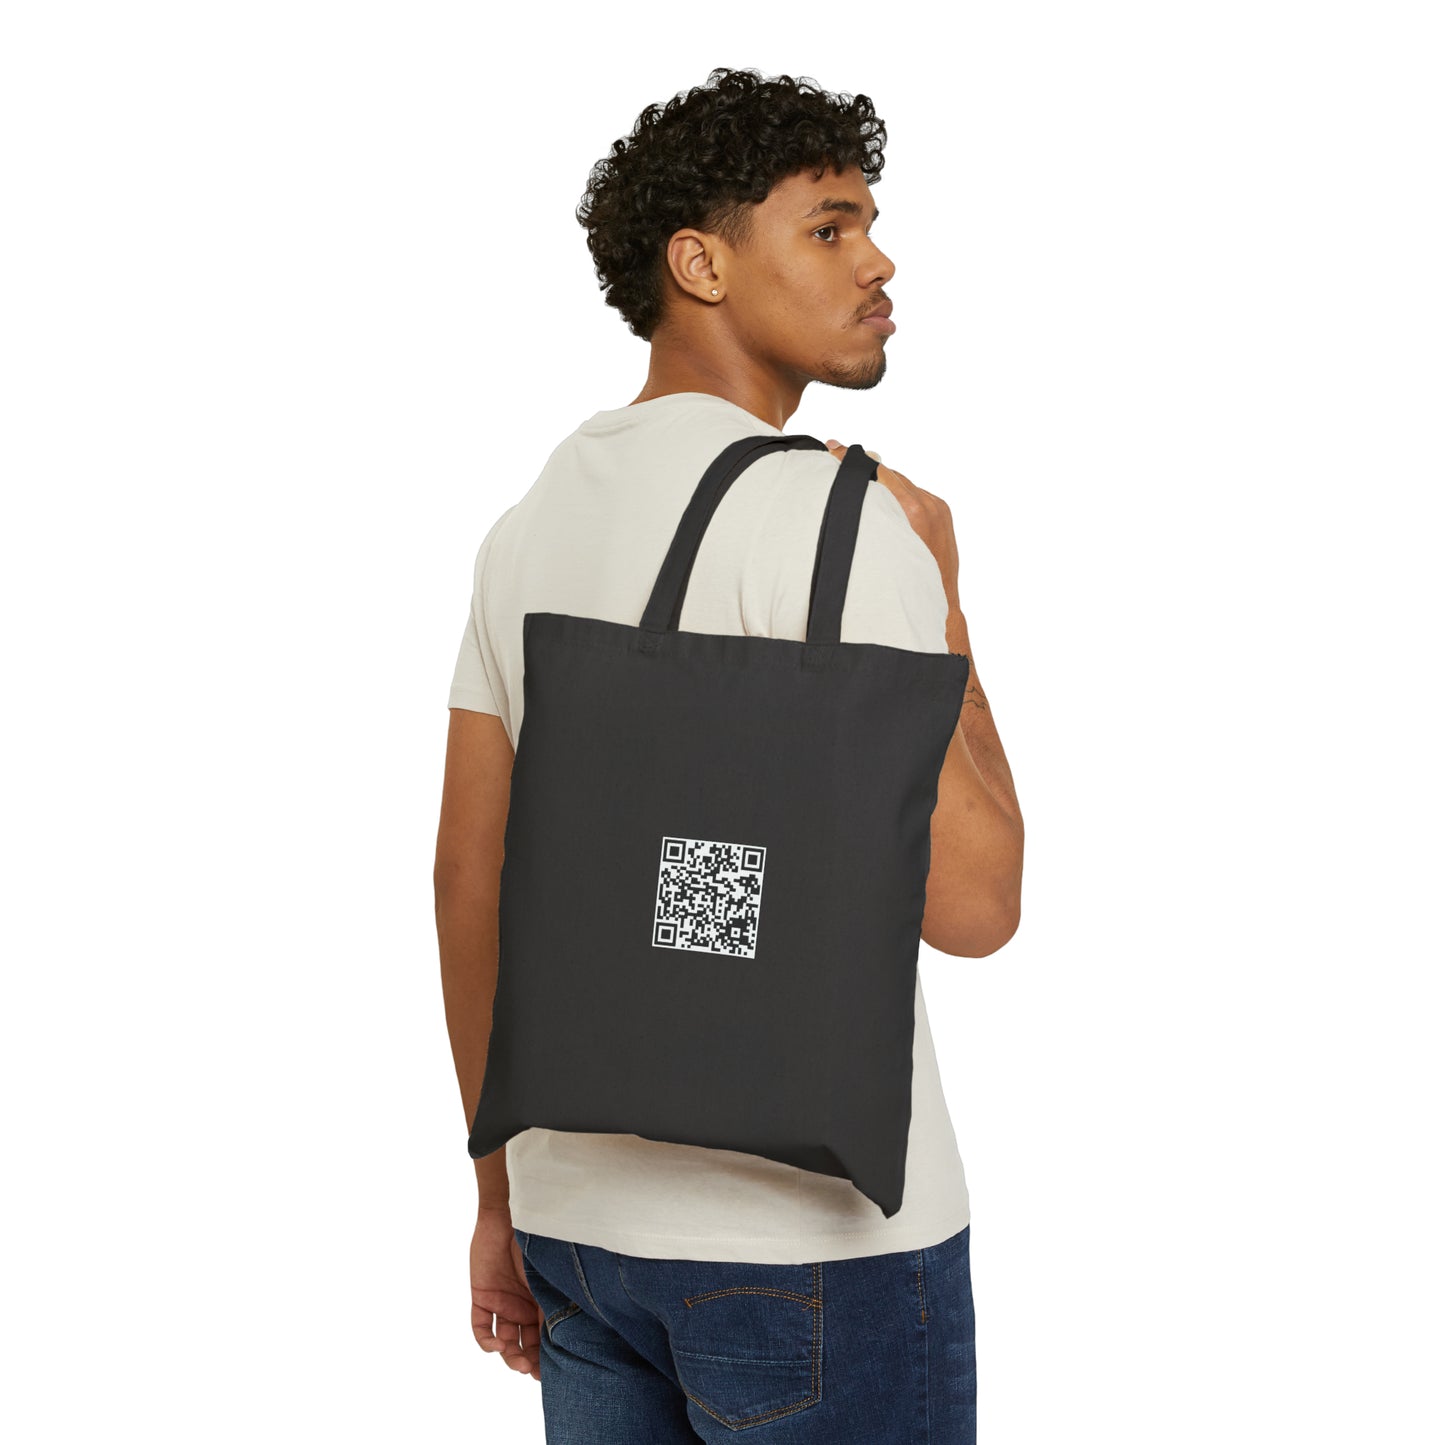 When We're Home In Africa - Cotton Canvas Tote Bag